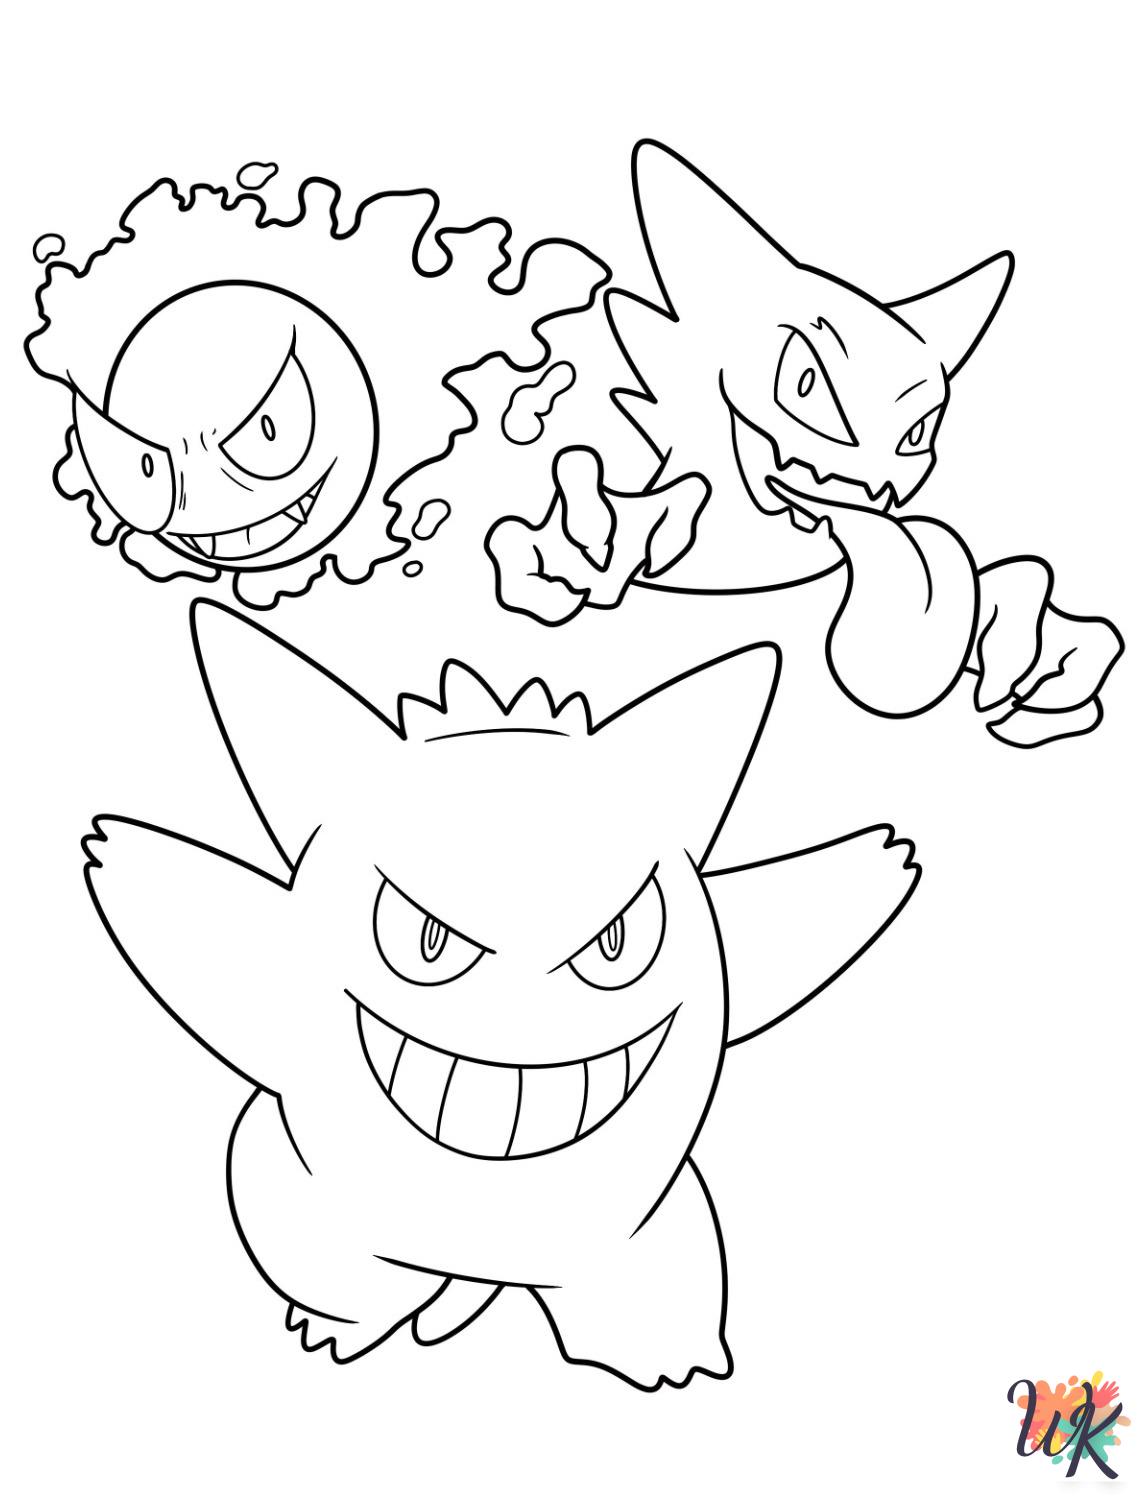 free full size printable Gengar coloring pages for adults pdf